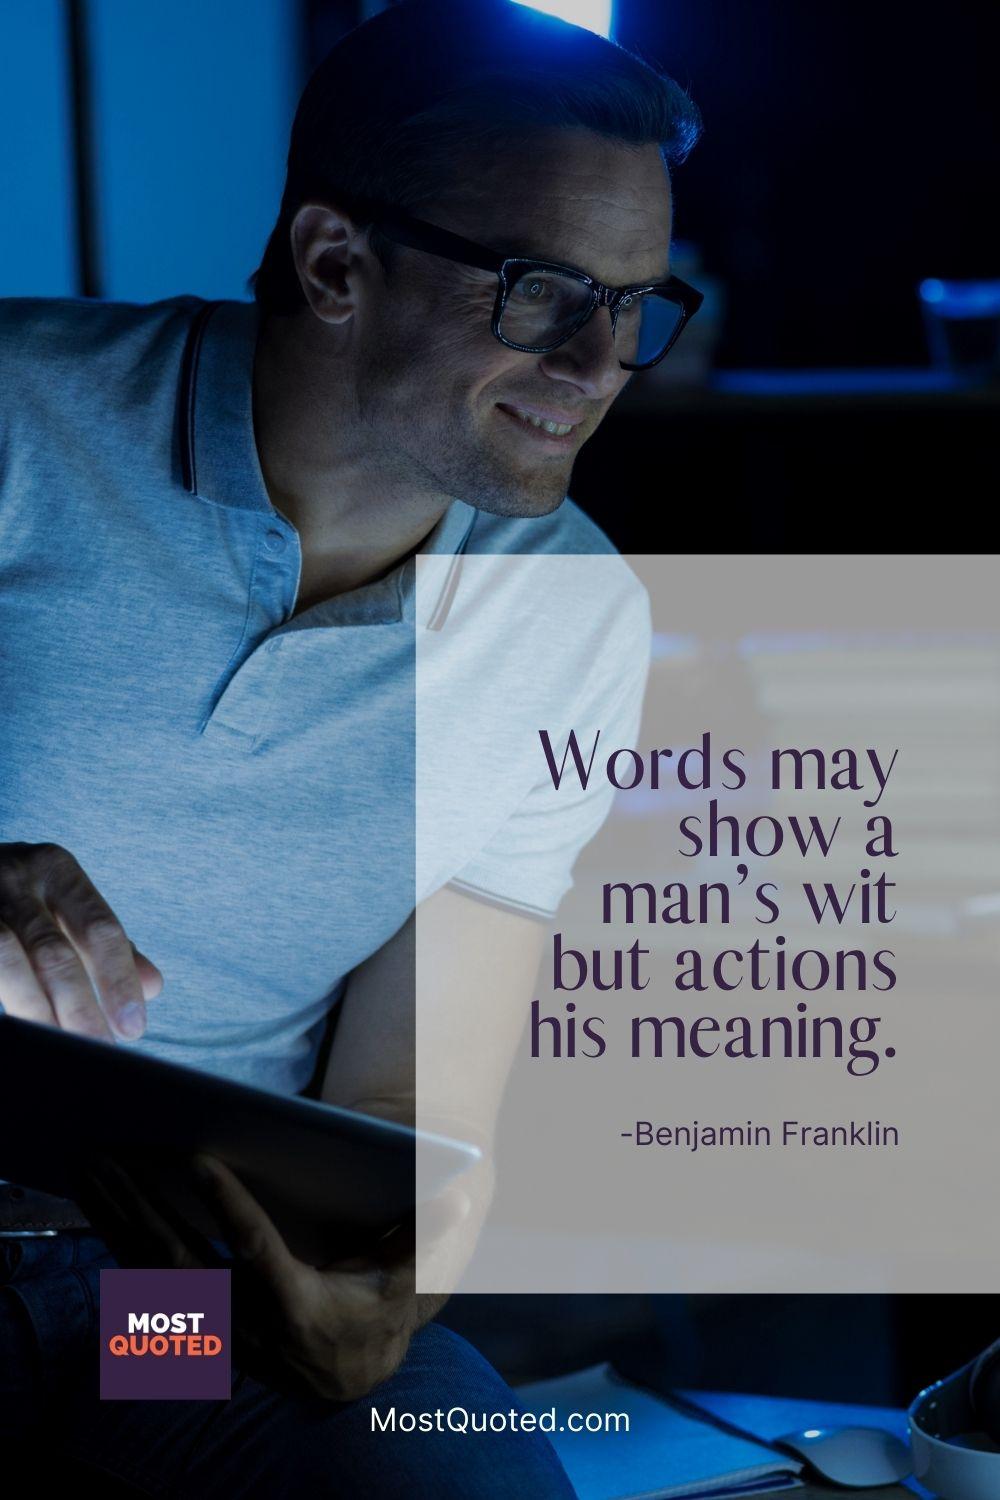 Words may show a man’s wit but actions his meaning. - Benjamin Franklin